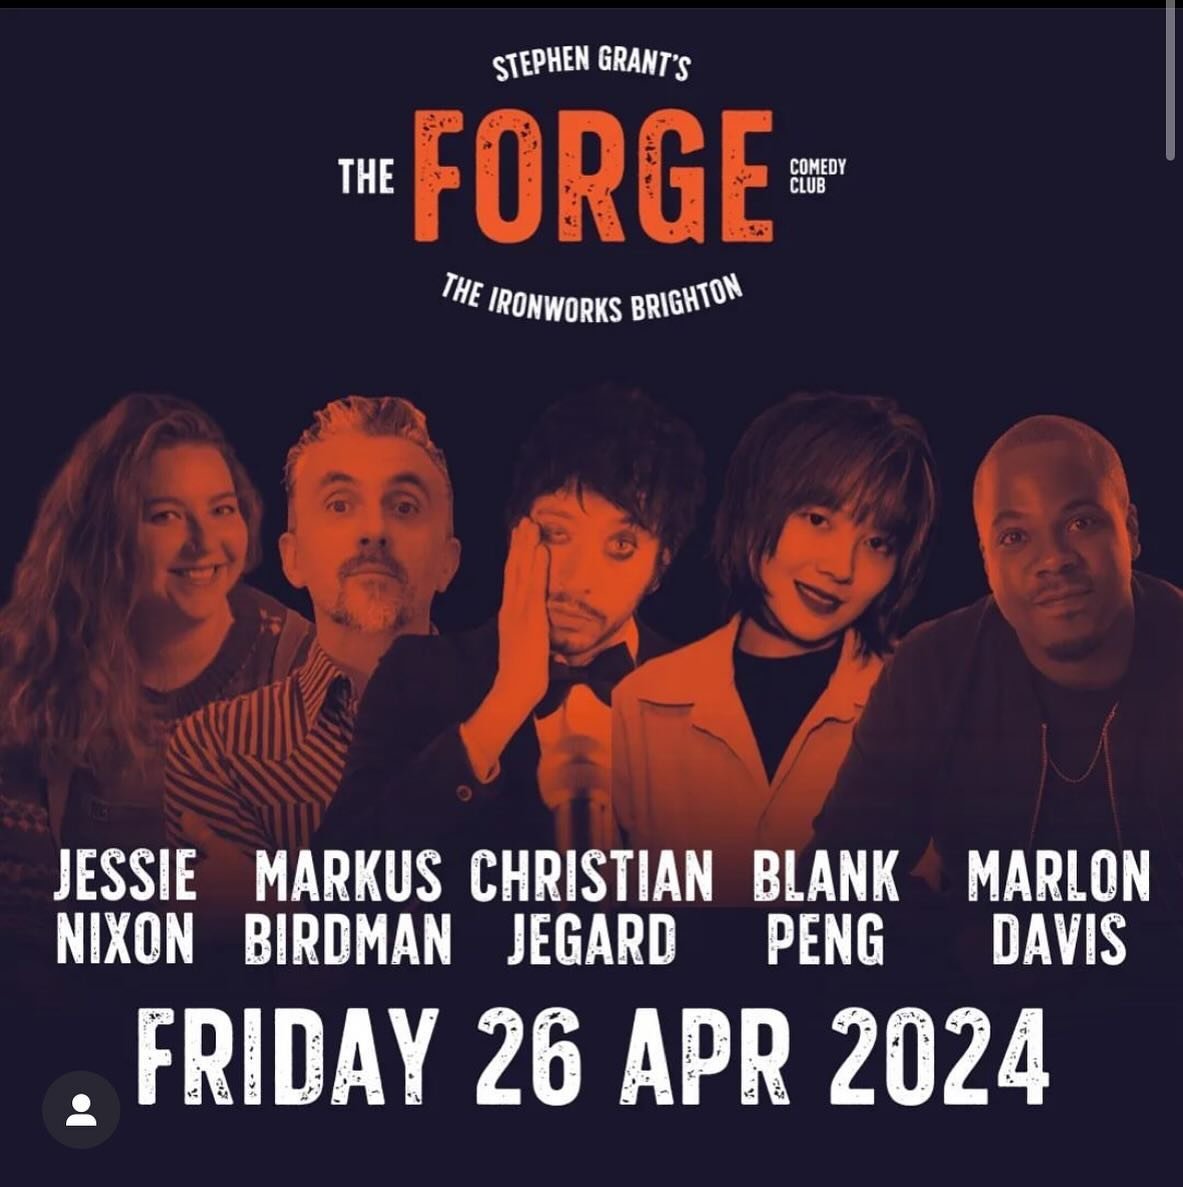 Tonight! Come see me singin and slingin wise at The Forge, Brighton! Xxx